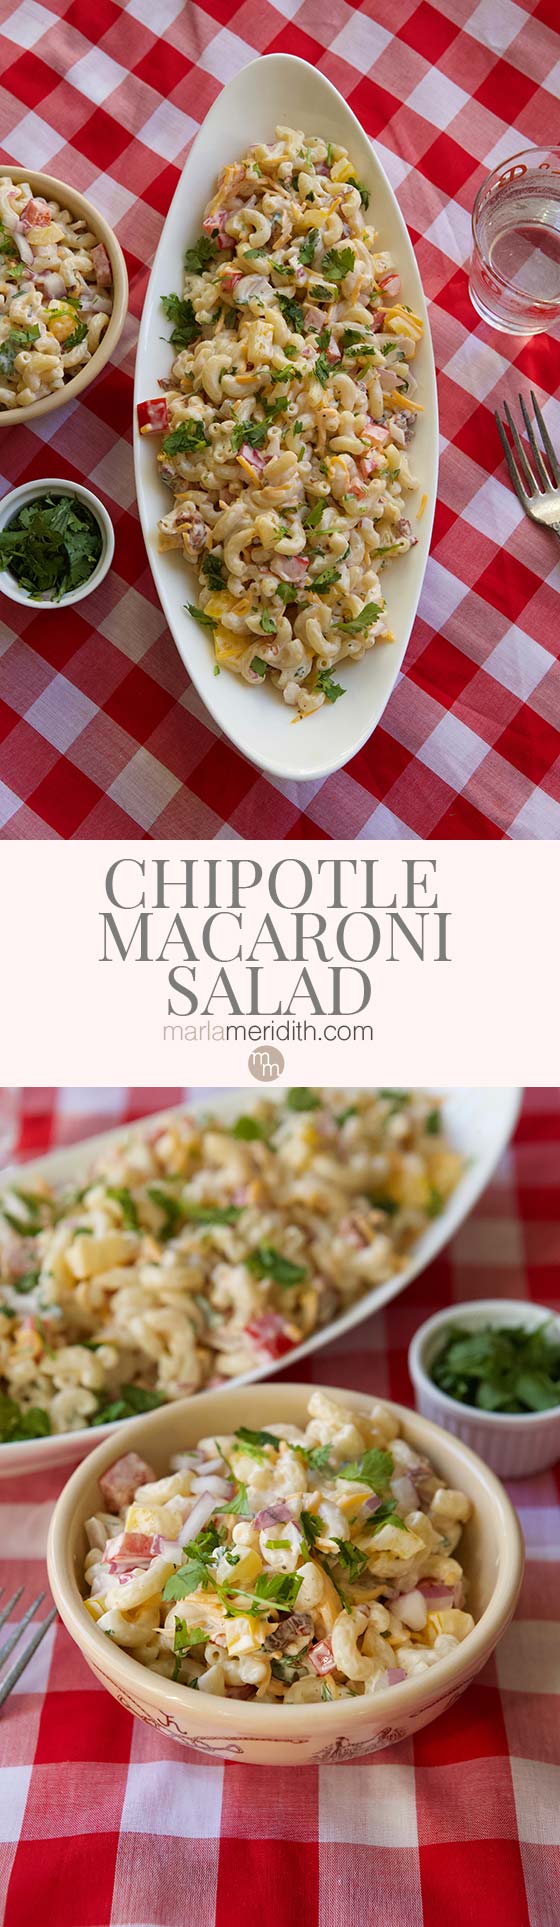 This Chipotle Macaroni Salad comes together in 15 minutes. Get this delish recipe on MarlaMeridith.com